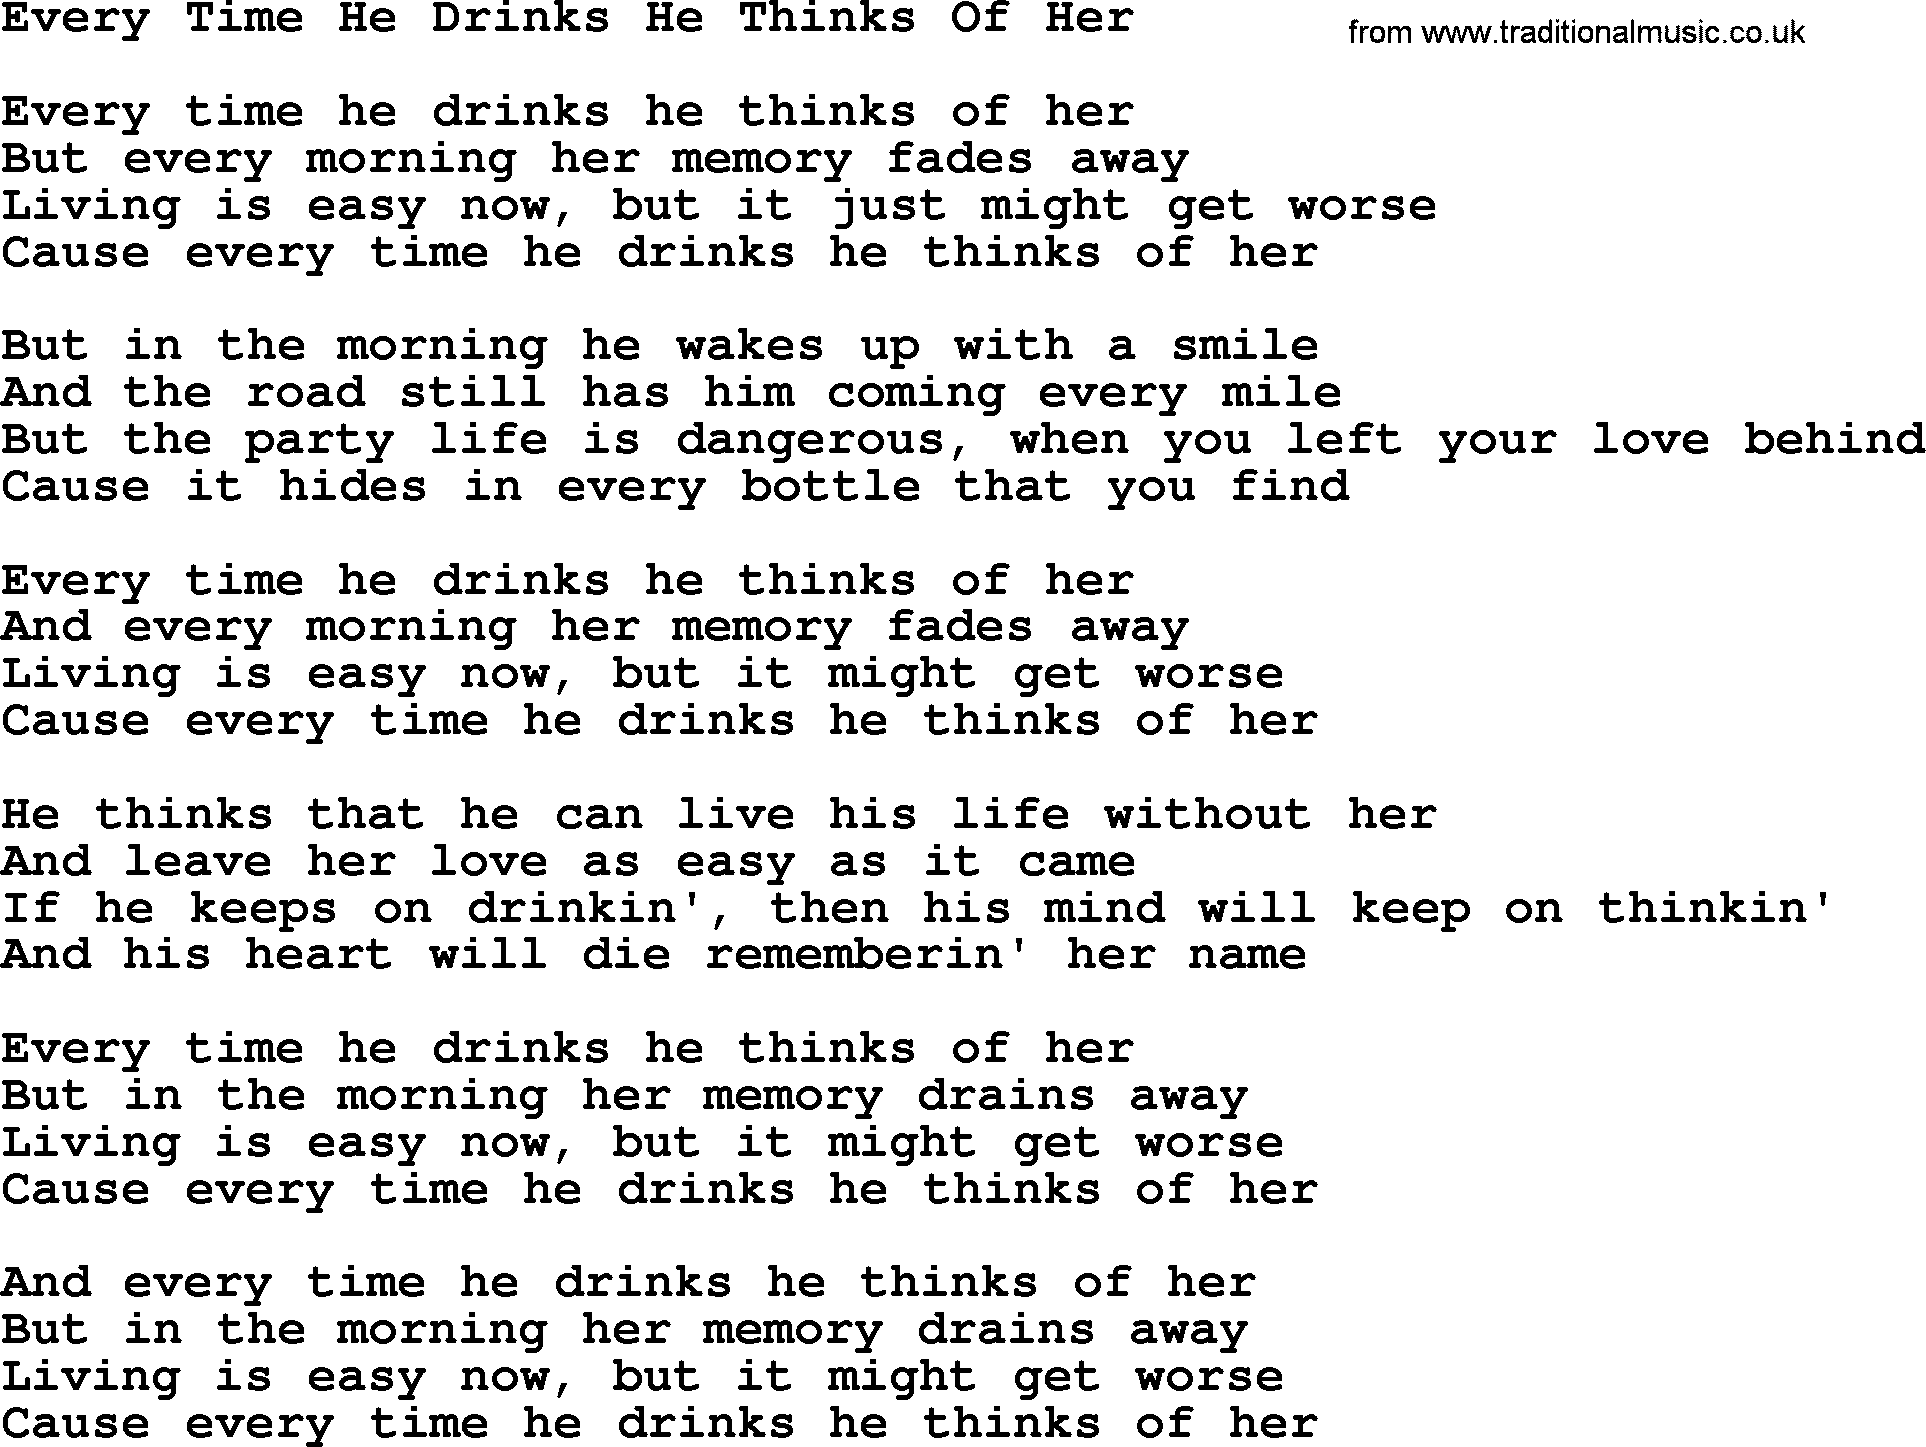 Willie Nelson song: Every Time He Drinks He Thinks Of Her lyrics